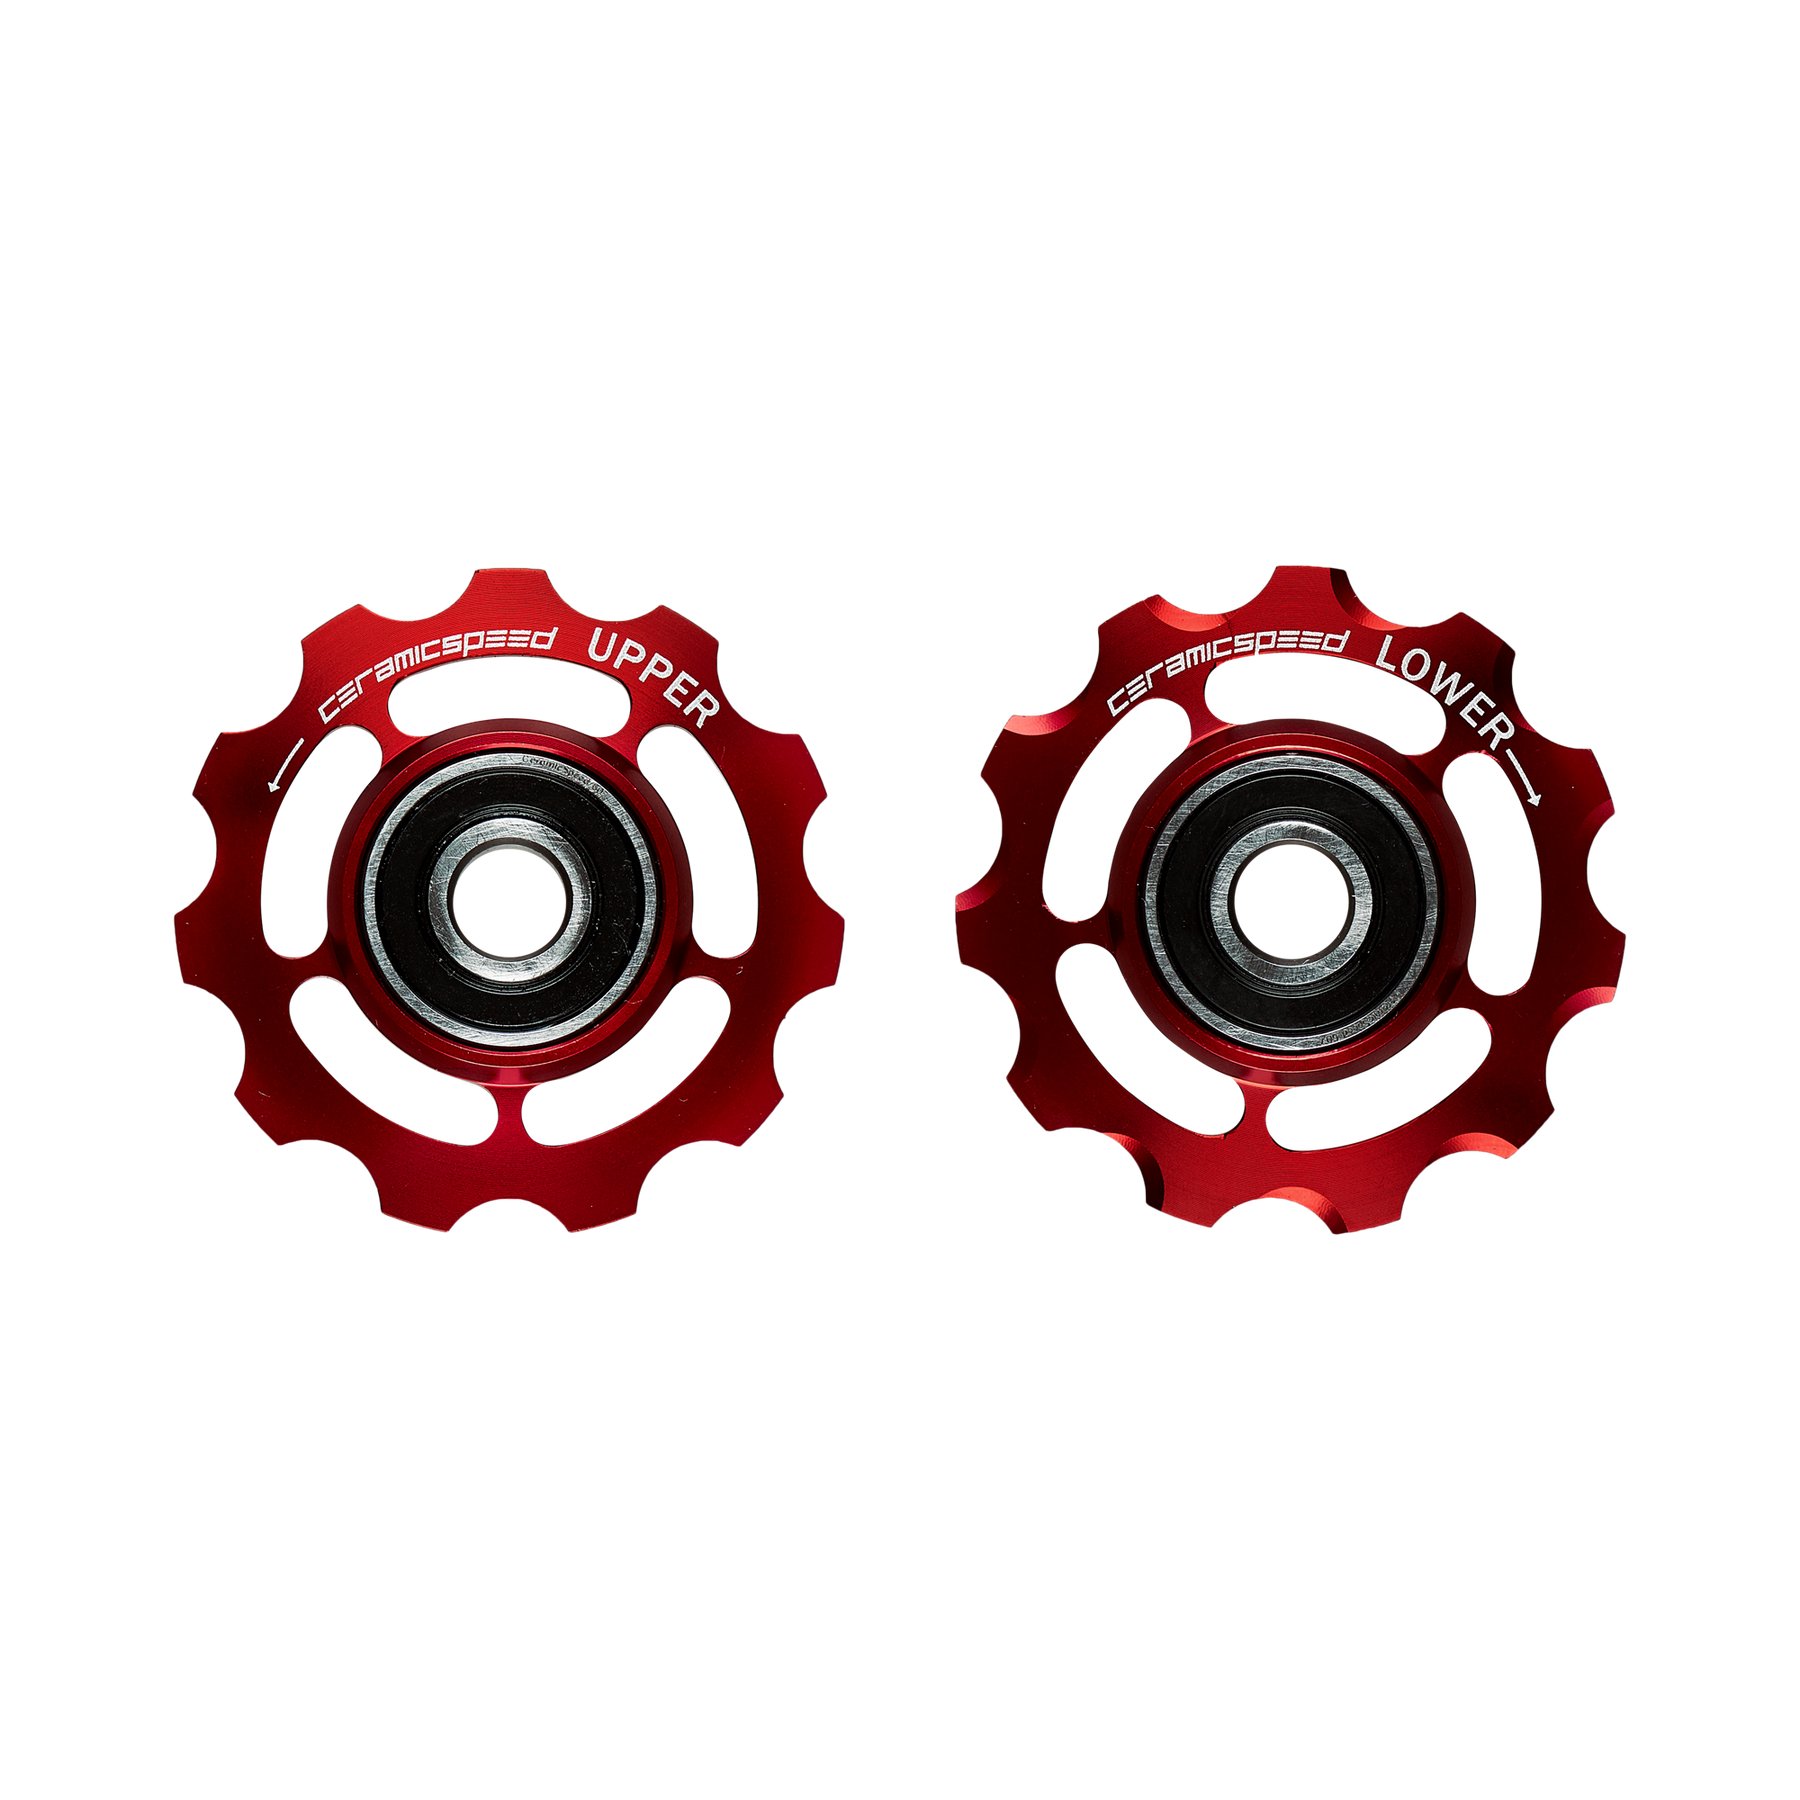 CeramicSpeed Pulley Wheels - Shimano - 11s - Red